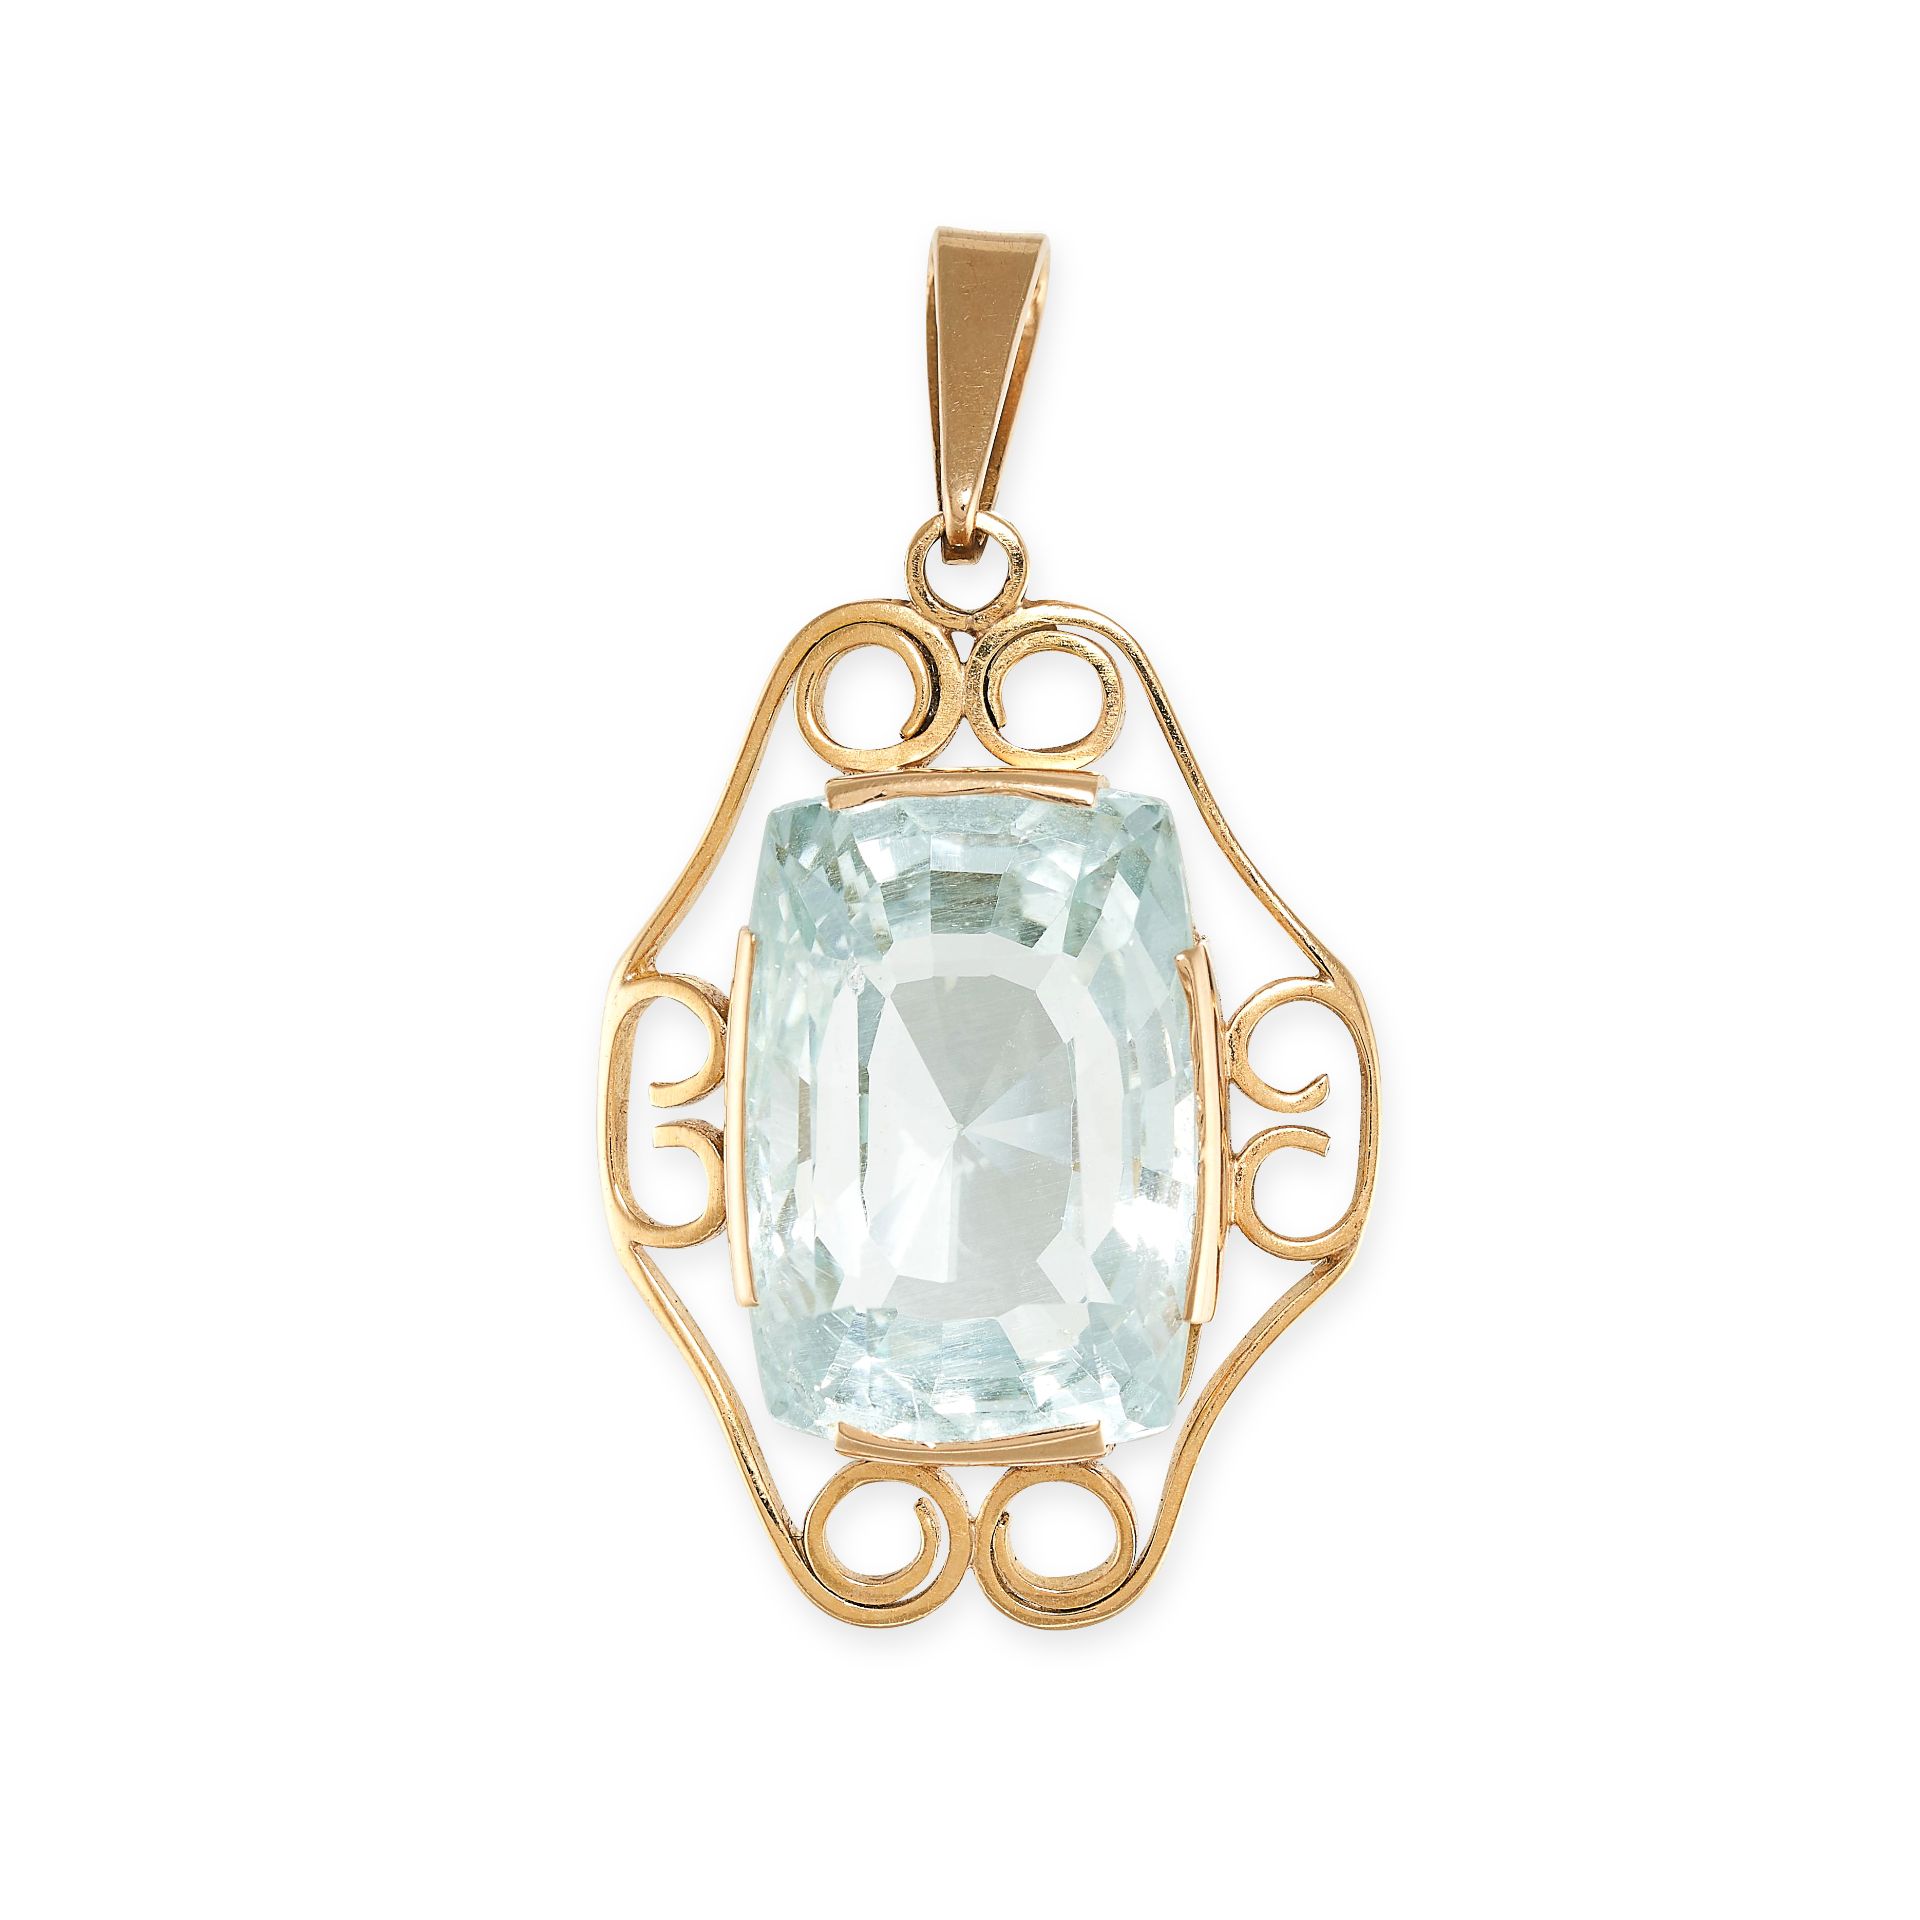 A VINTAGE AQUAMARINE PENDANT in yellow gold, set with a cushion cut aquamarine of 12.15 carats in